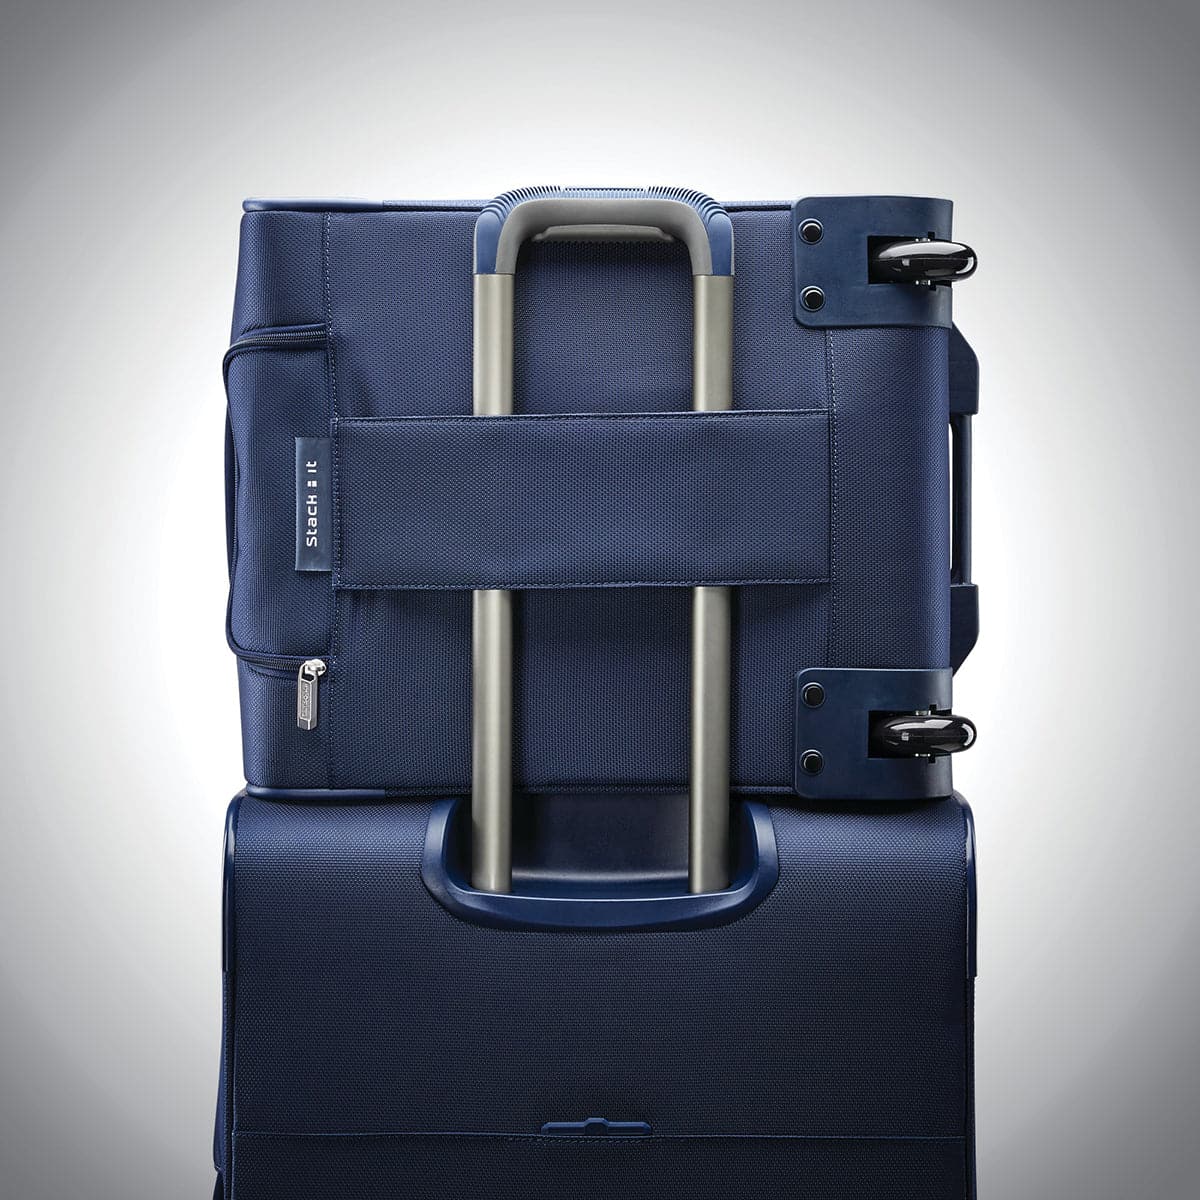 Samsonite Insignis Underseater Wheeled Carry On